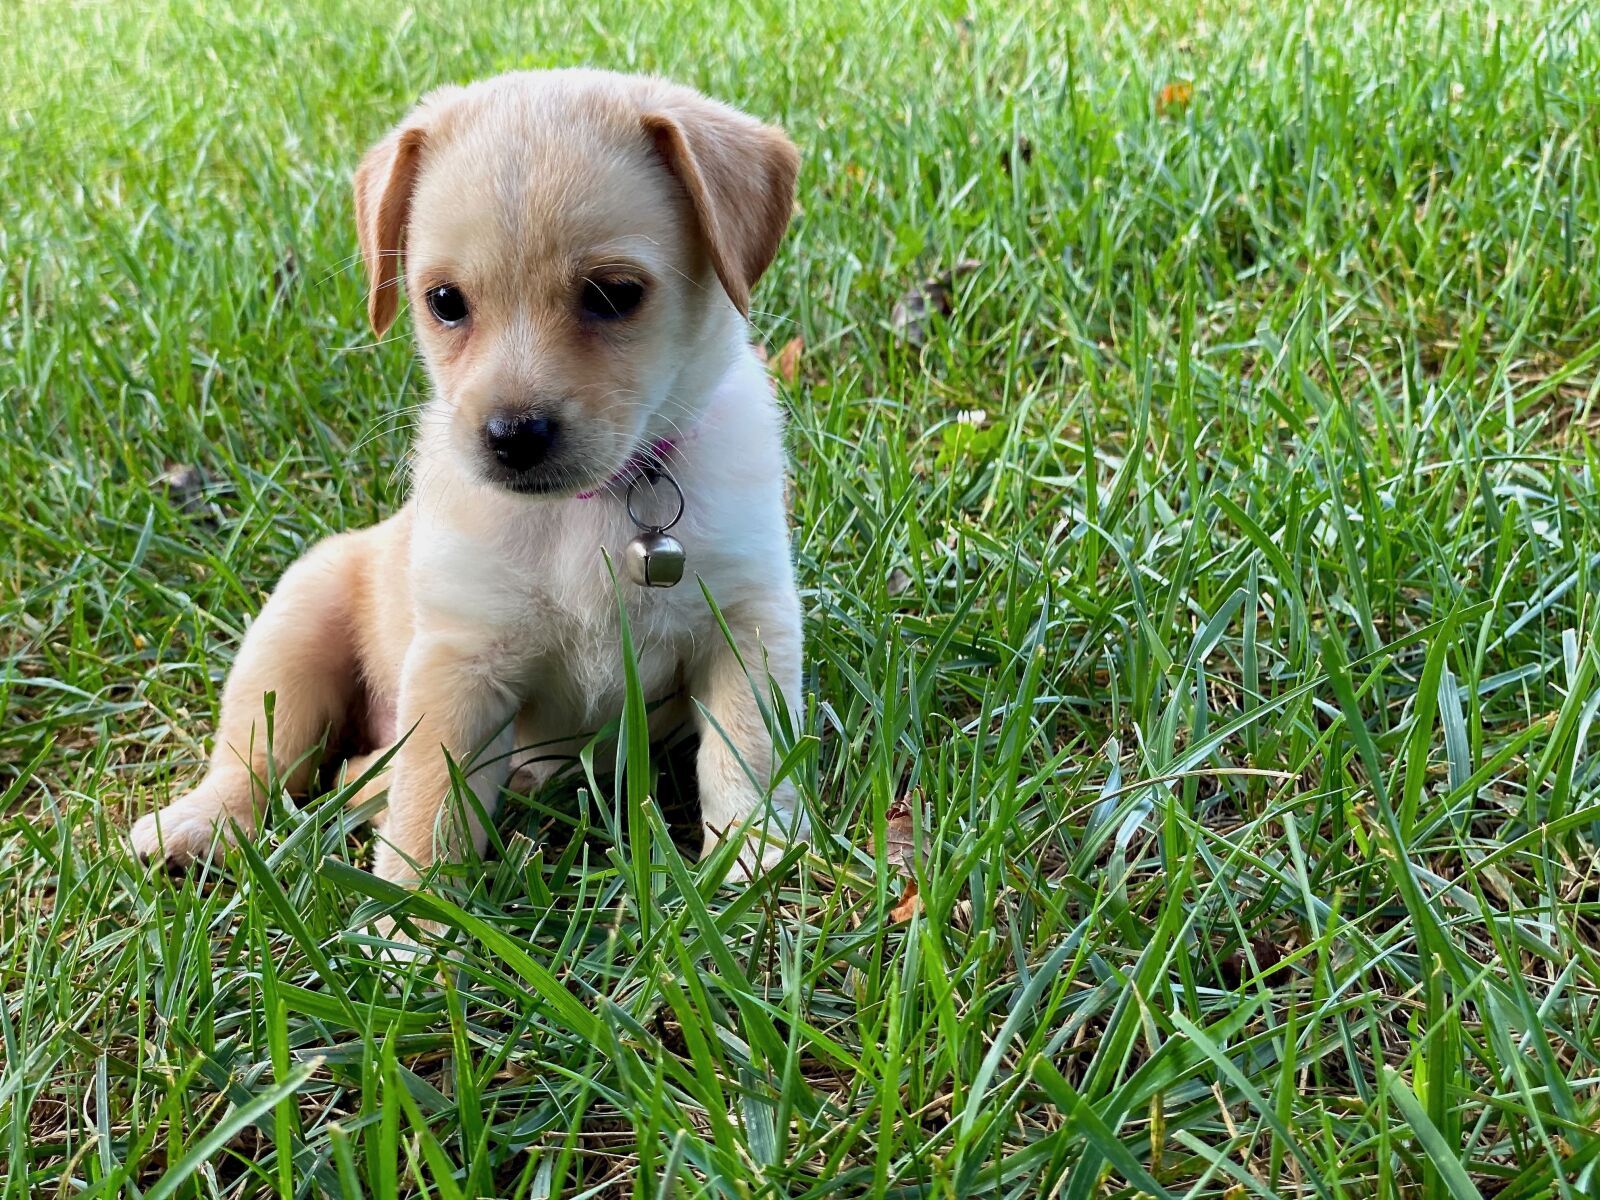 iPhone 11 Pro back dual camera 6mm f/2 sample photo. Puppy, grass, dog photography